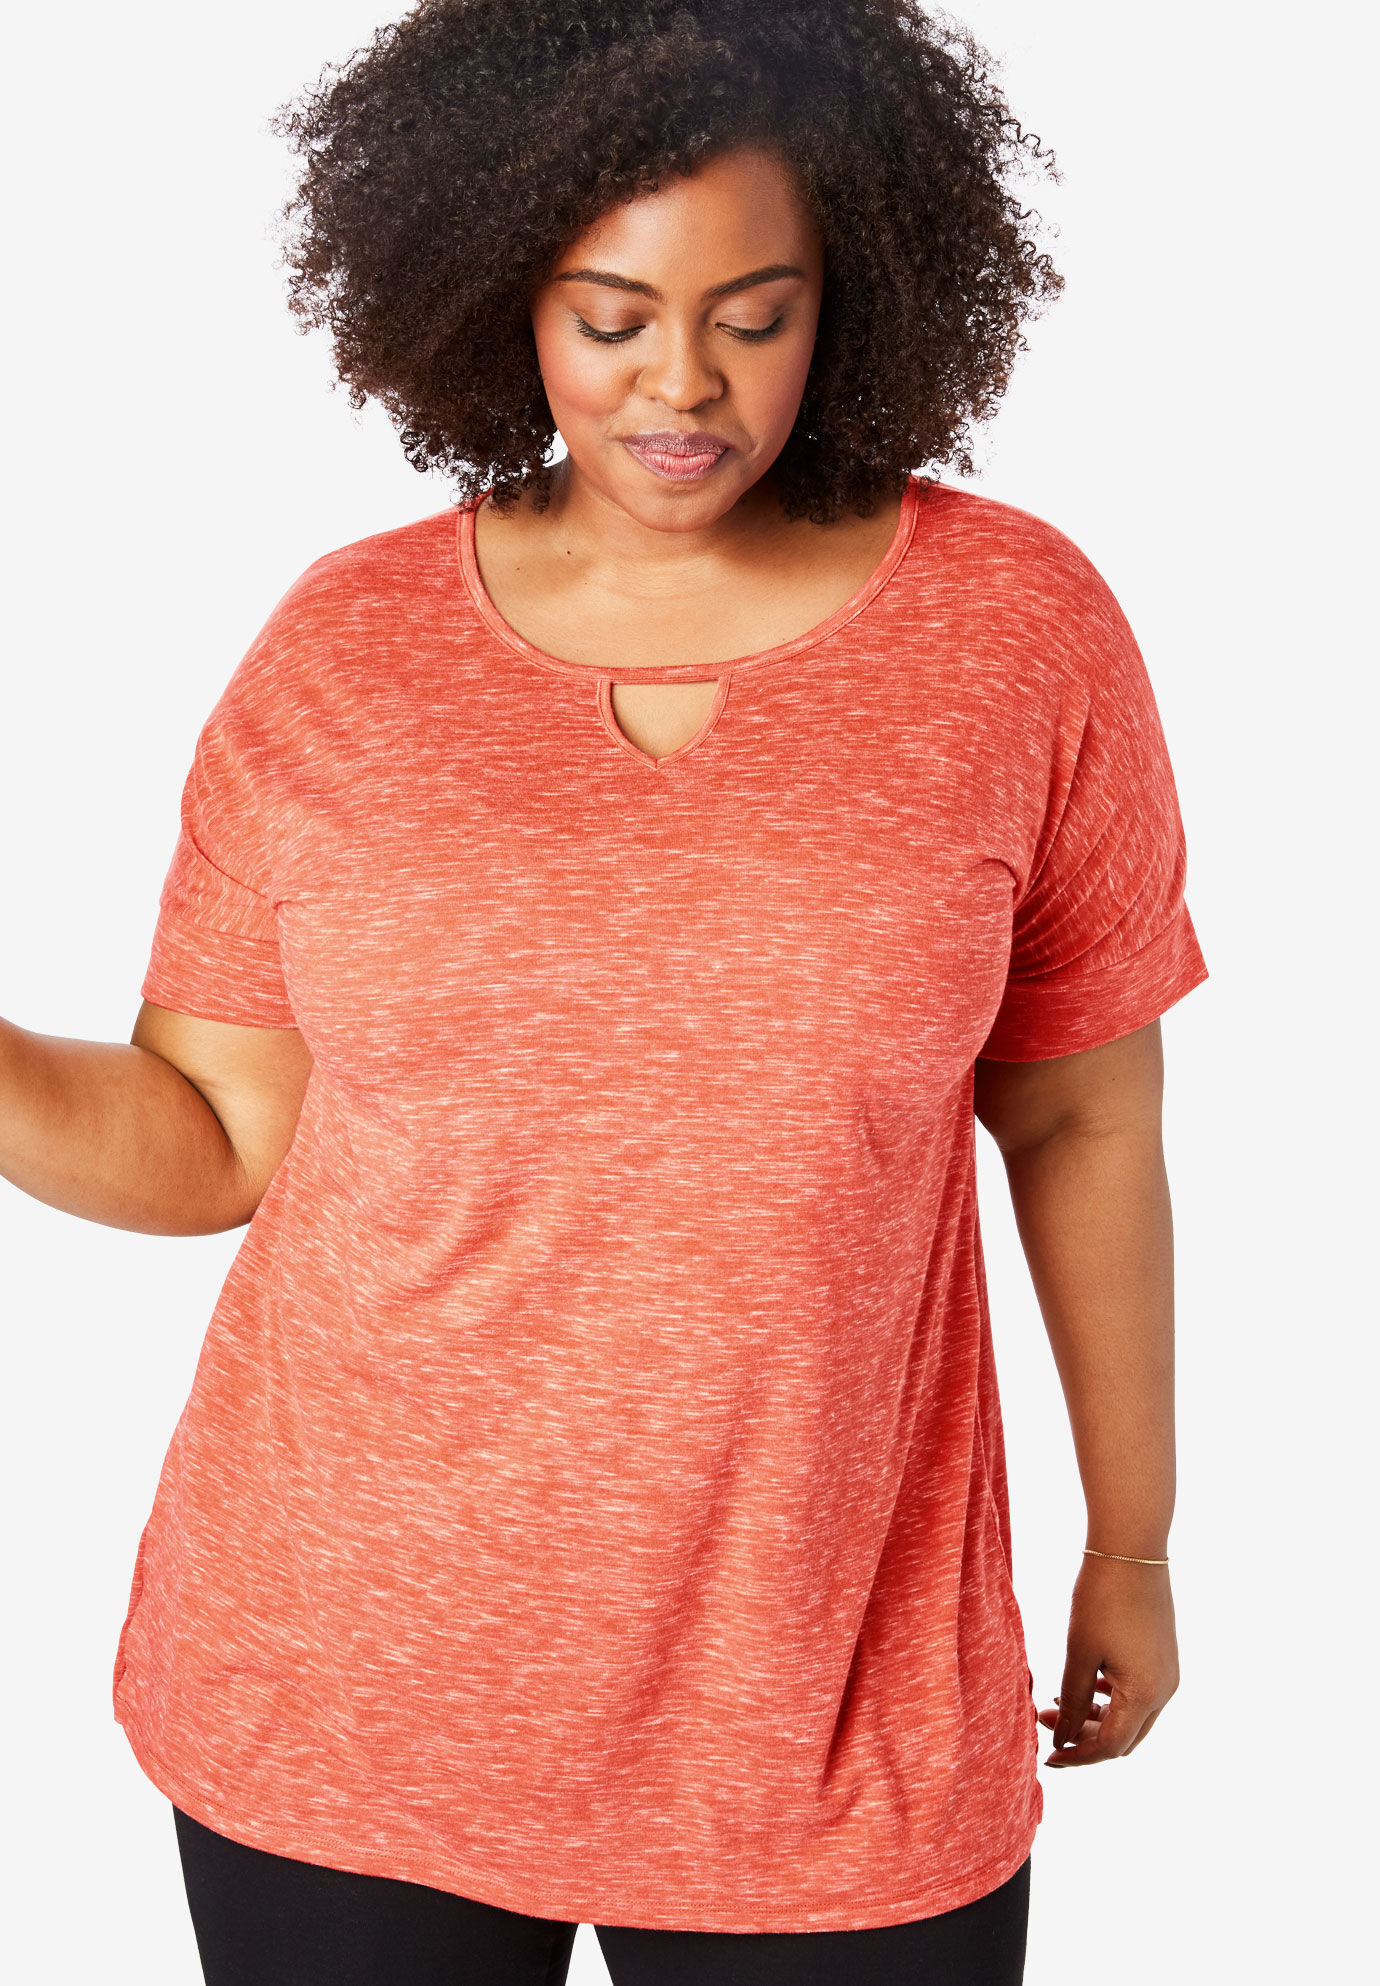 Woman Within Women's Plus Size Layered-Look Tee Shirt